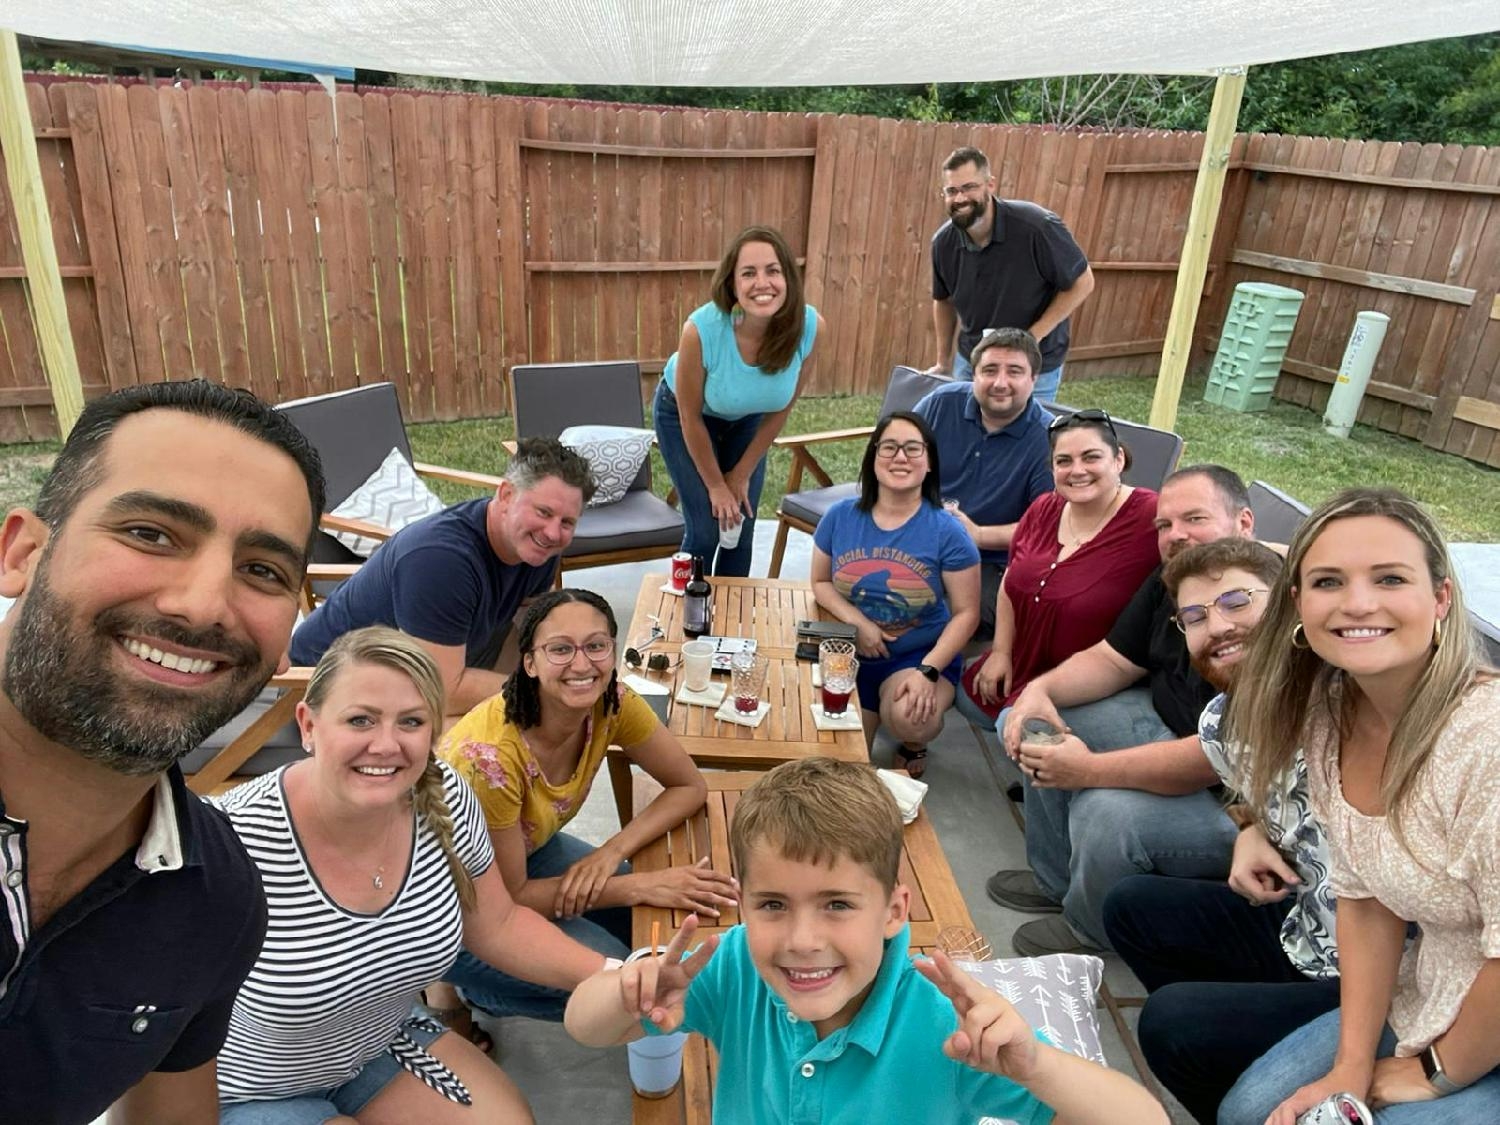 The AltruVista team and family enjoying great food and outdoor games together in the Summer of 2021